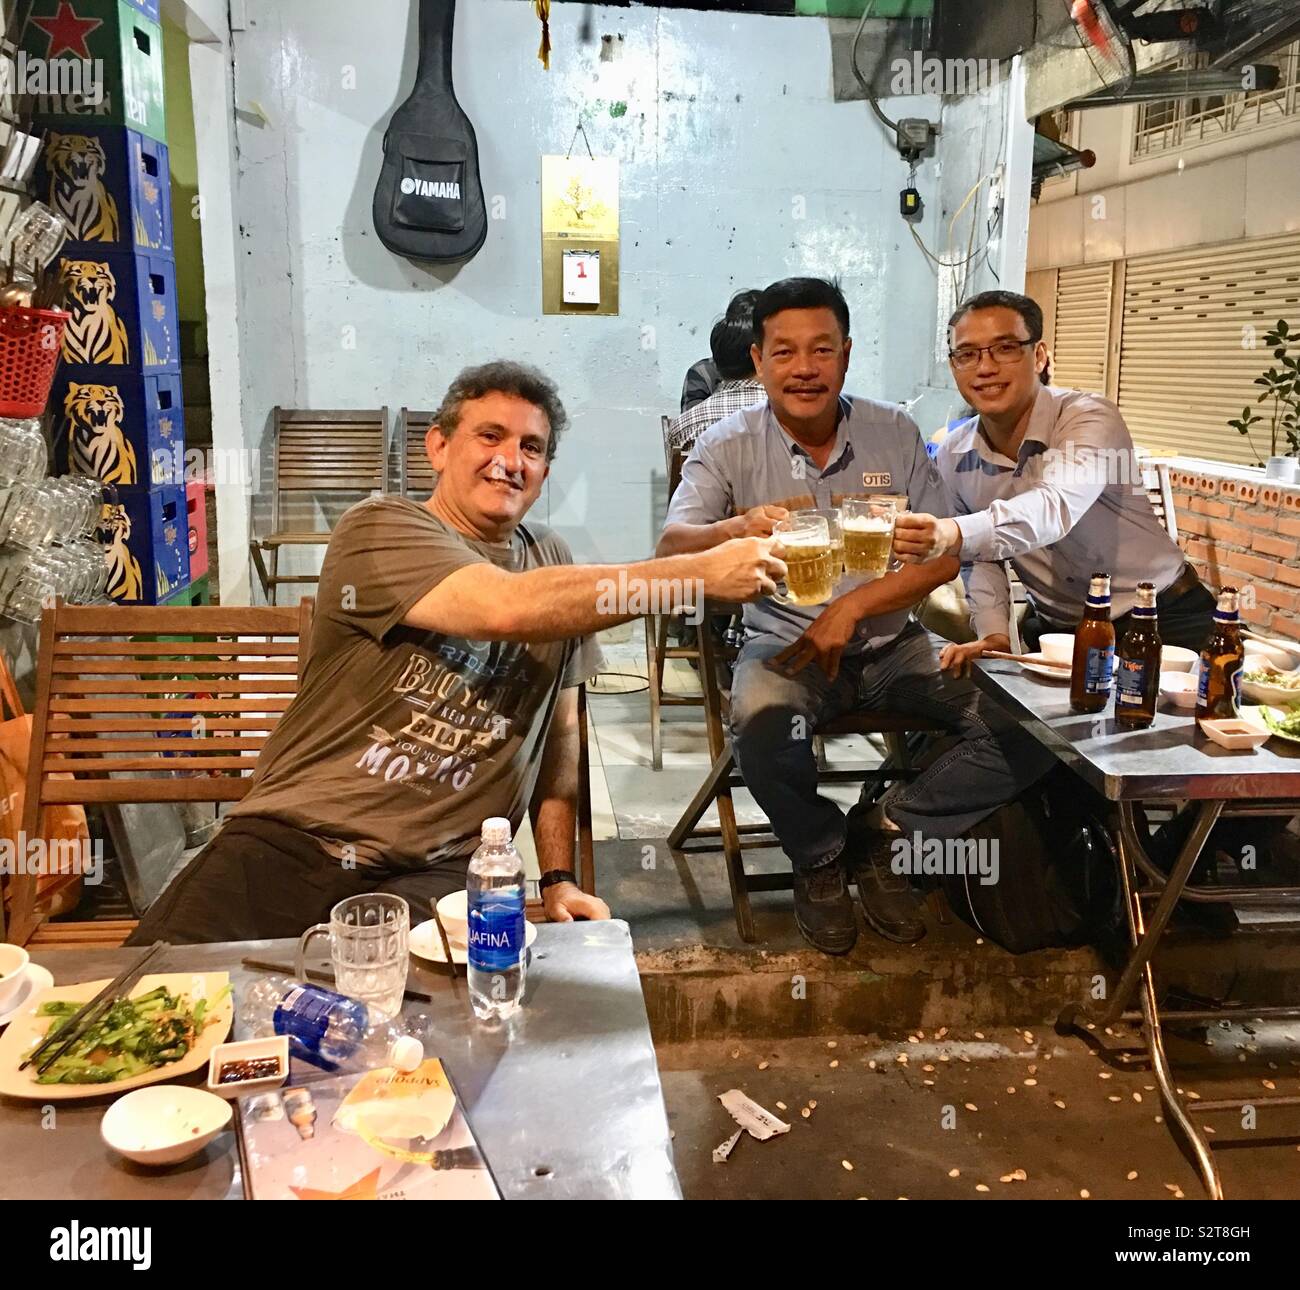 Caucasian tourist sharing a beer with locals in a Vietnamese restaurant in Ho Chi Minh City. Stock Photo